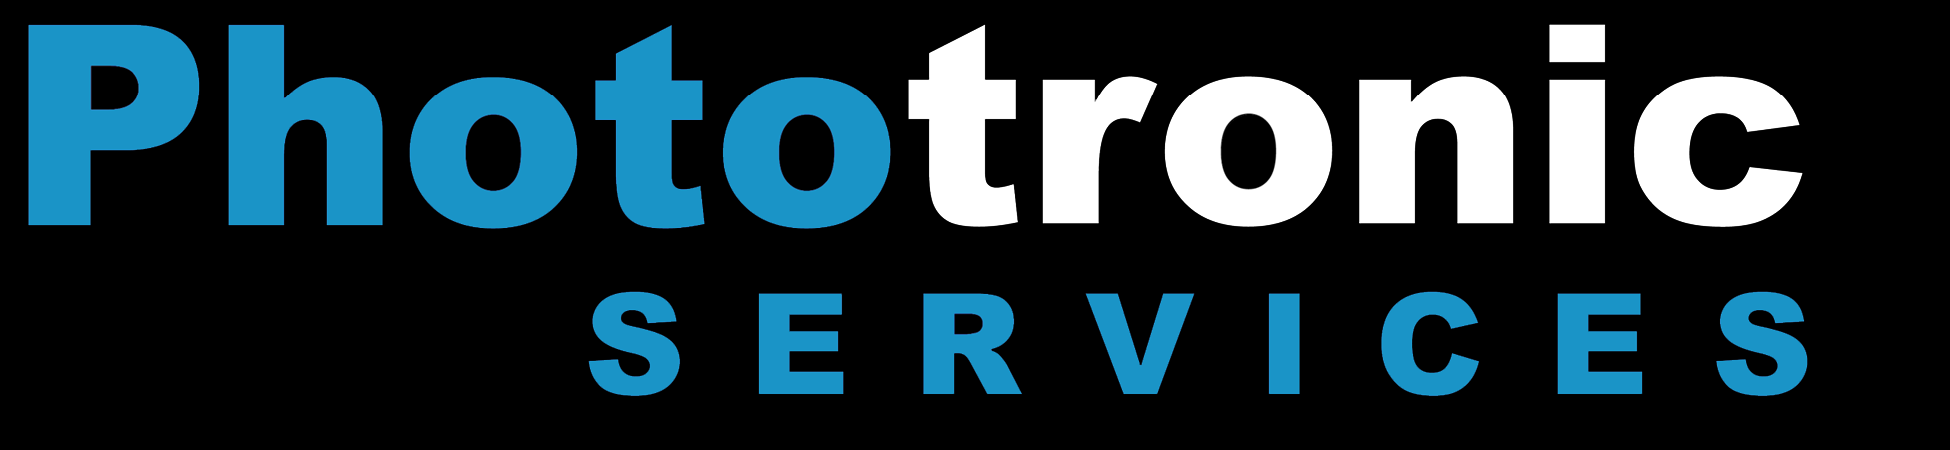 Phototronic Services :: Your Alpha Specialists